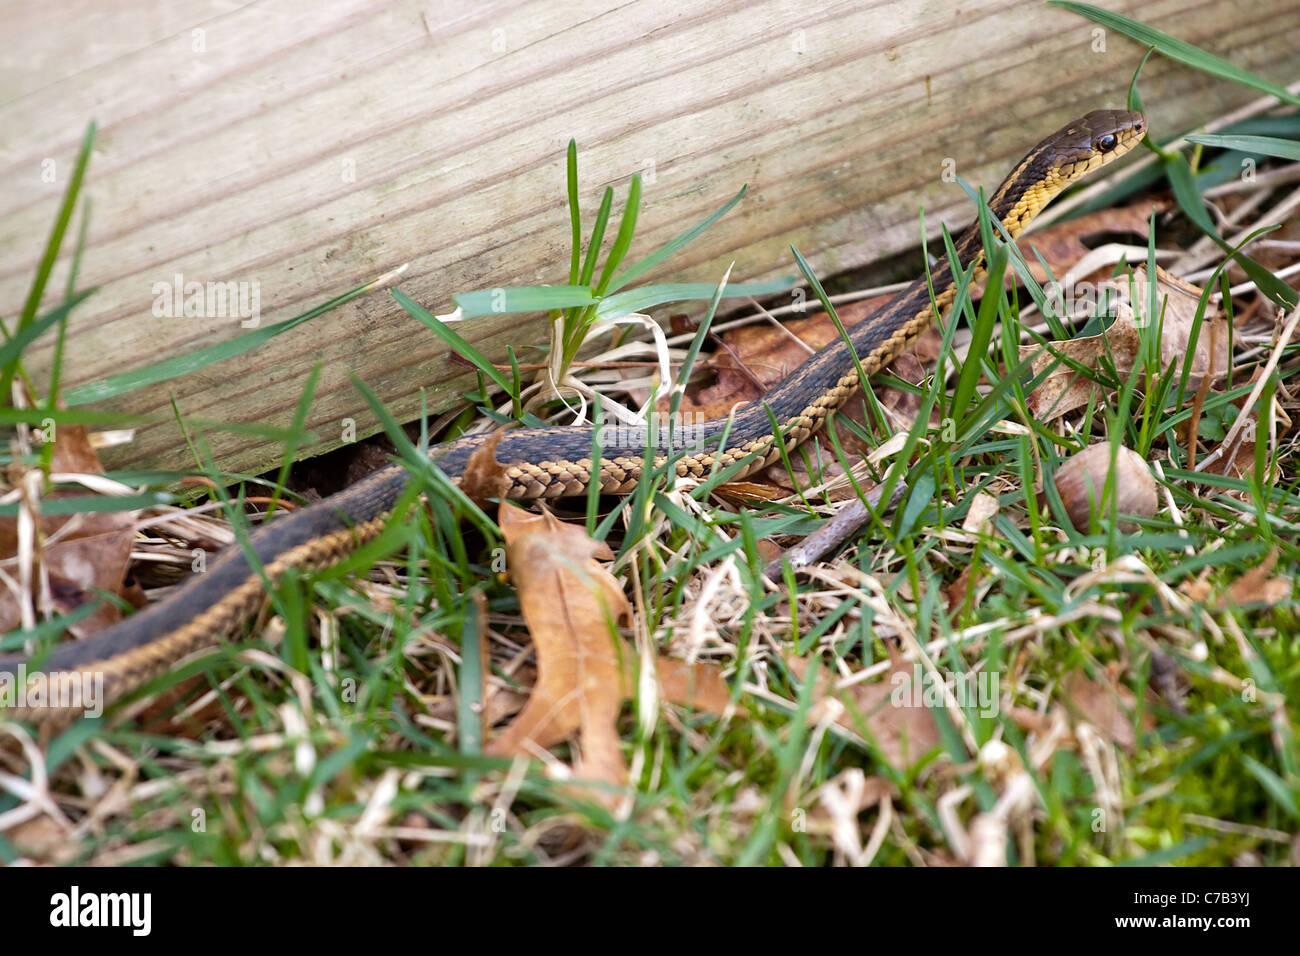 A black and yellow North American Garter snake slithering through the green grass. Shallow depth of field. Stock Photo